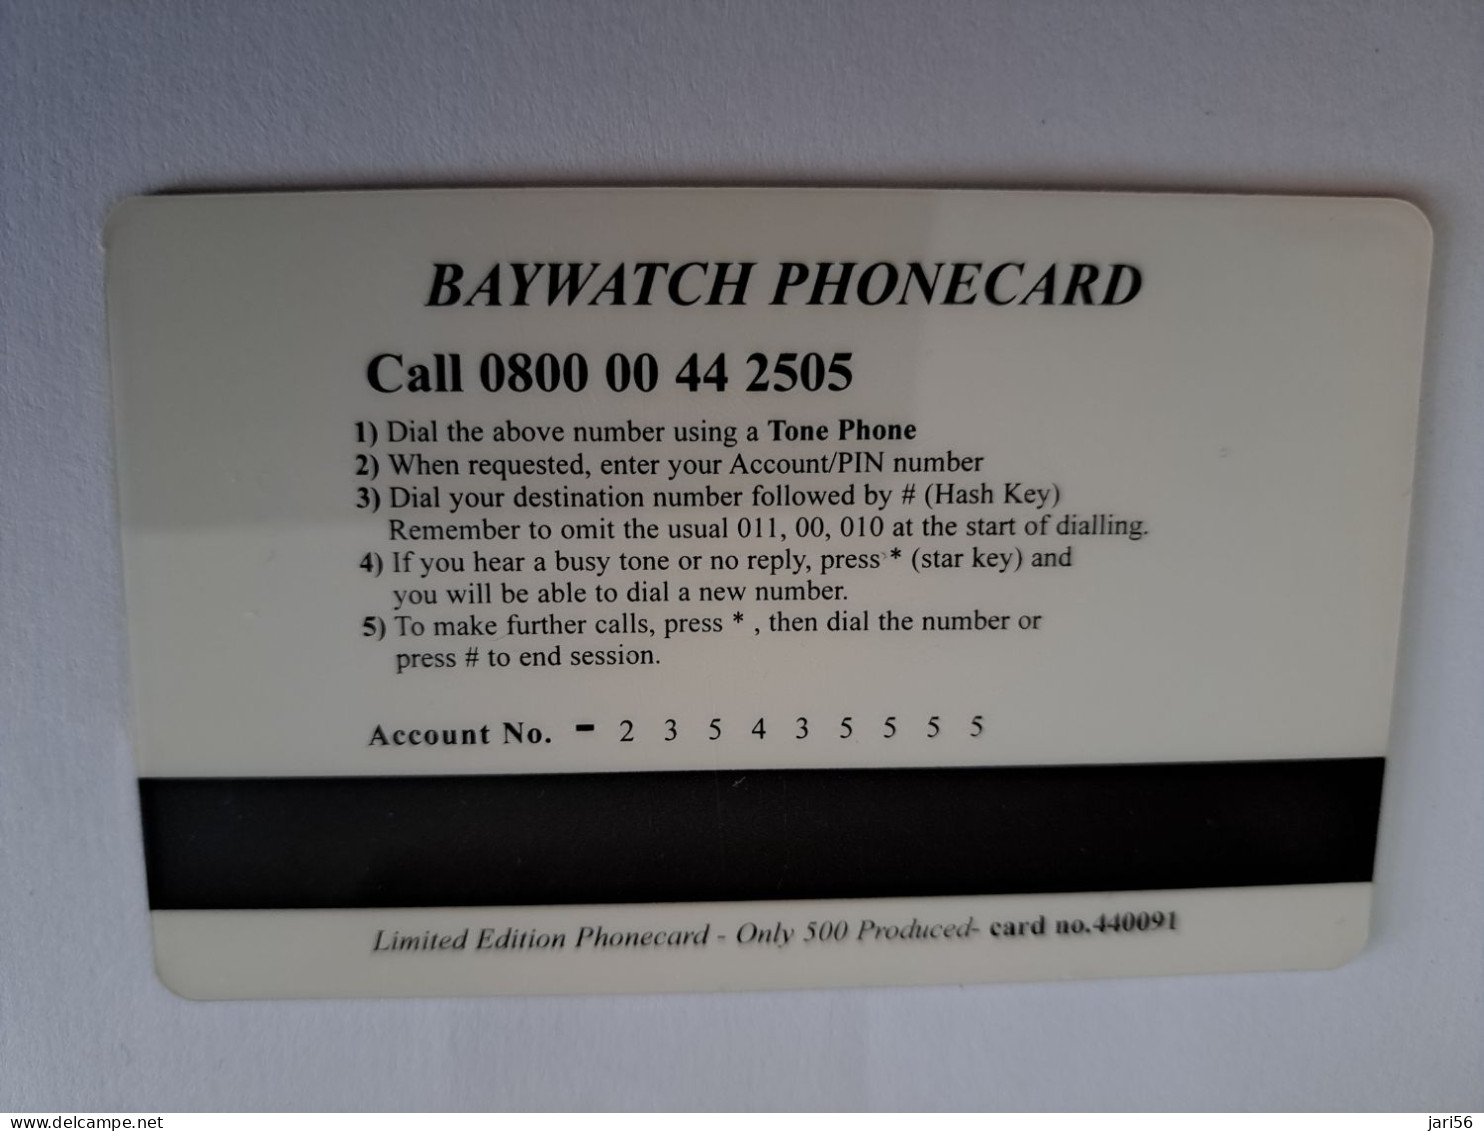 GREAT BRITAIN / 10 POUND /MAGSTRIPE  / BAYWATCH PHONECARD/ LIMITED EDITION/ ONLY 500 EX     **15682** - [10] Colecciones